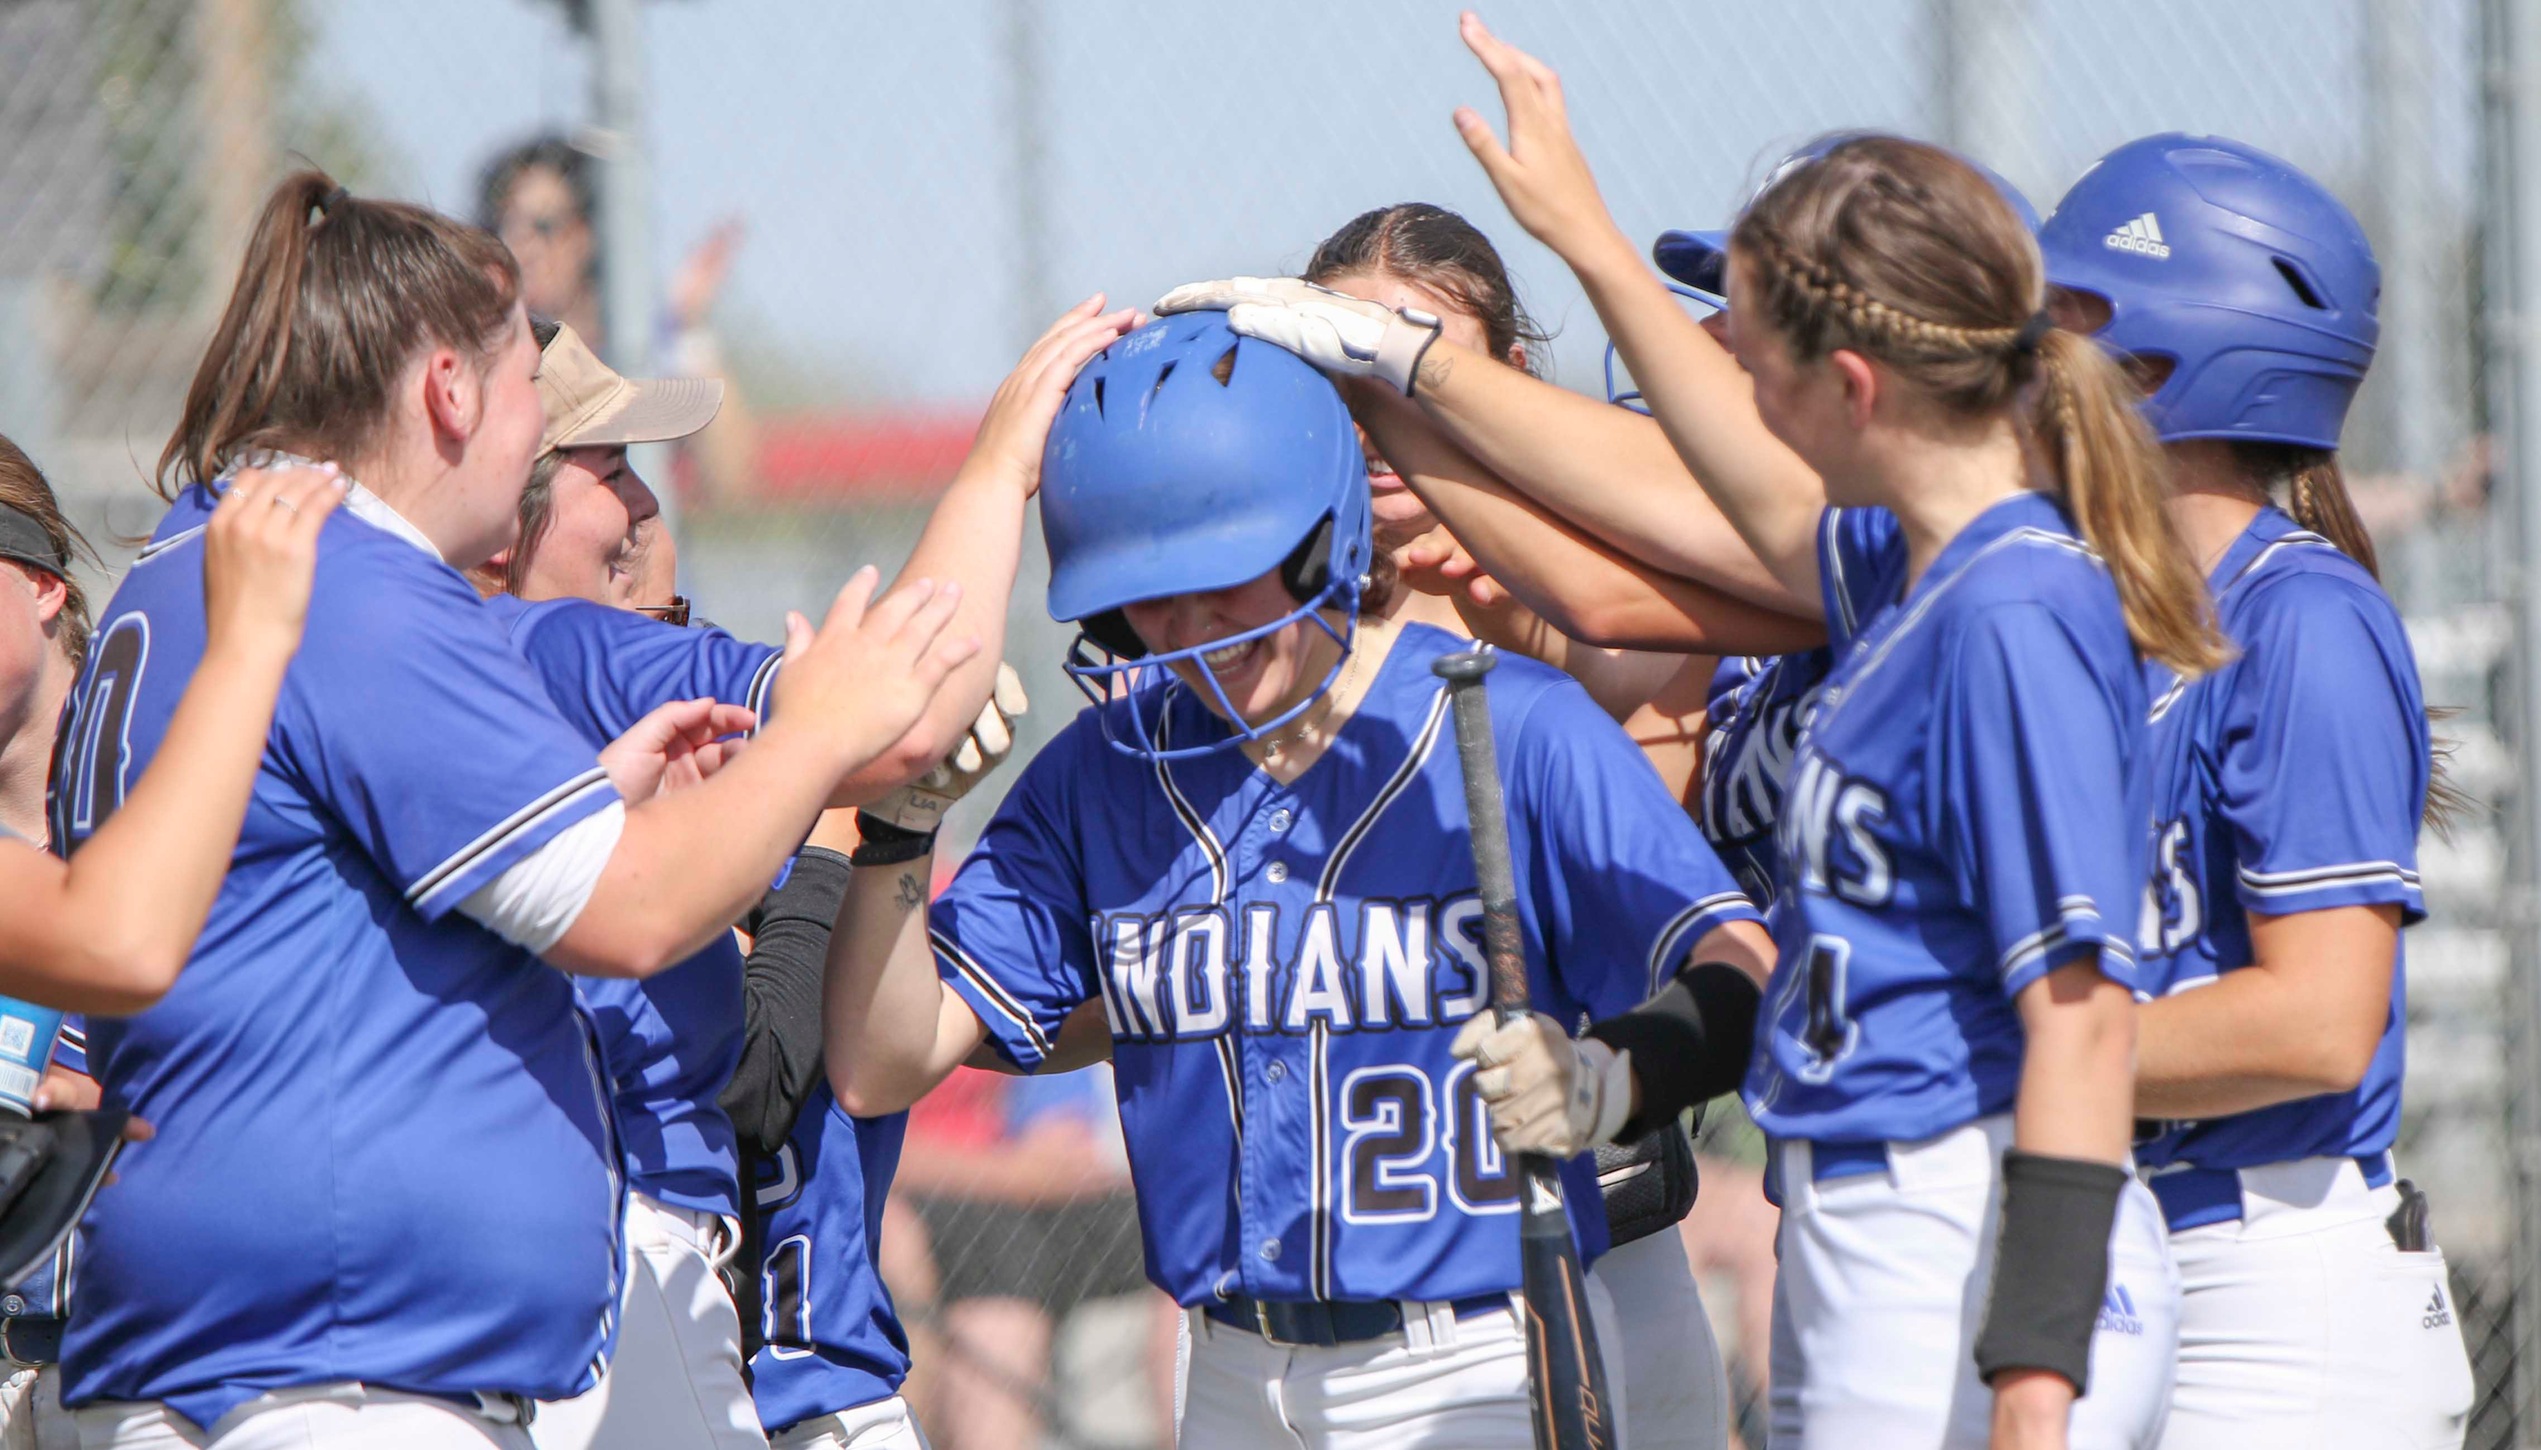 MCC Softball wins 5-1 over NJC to open tournament play